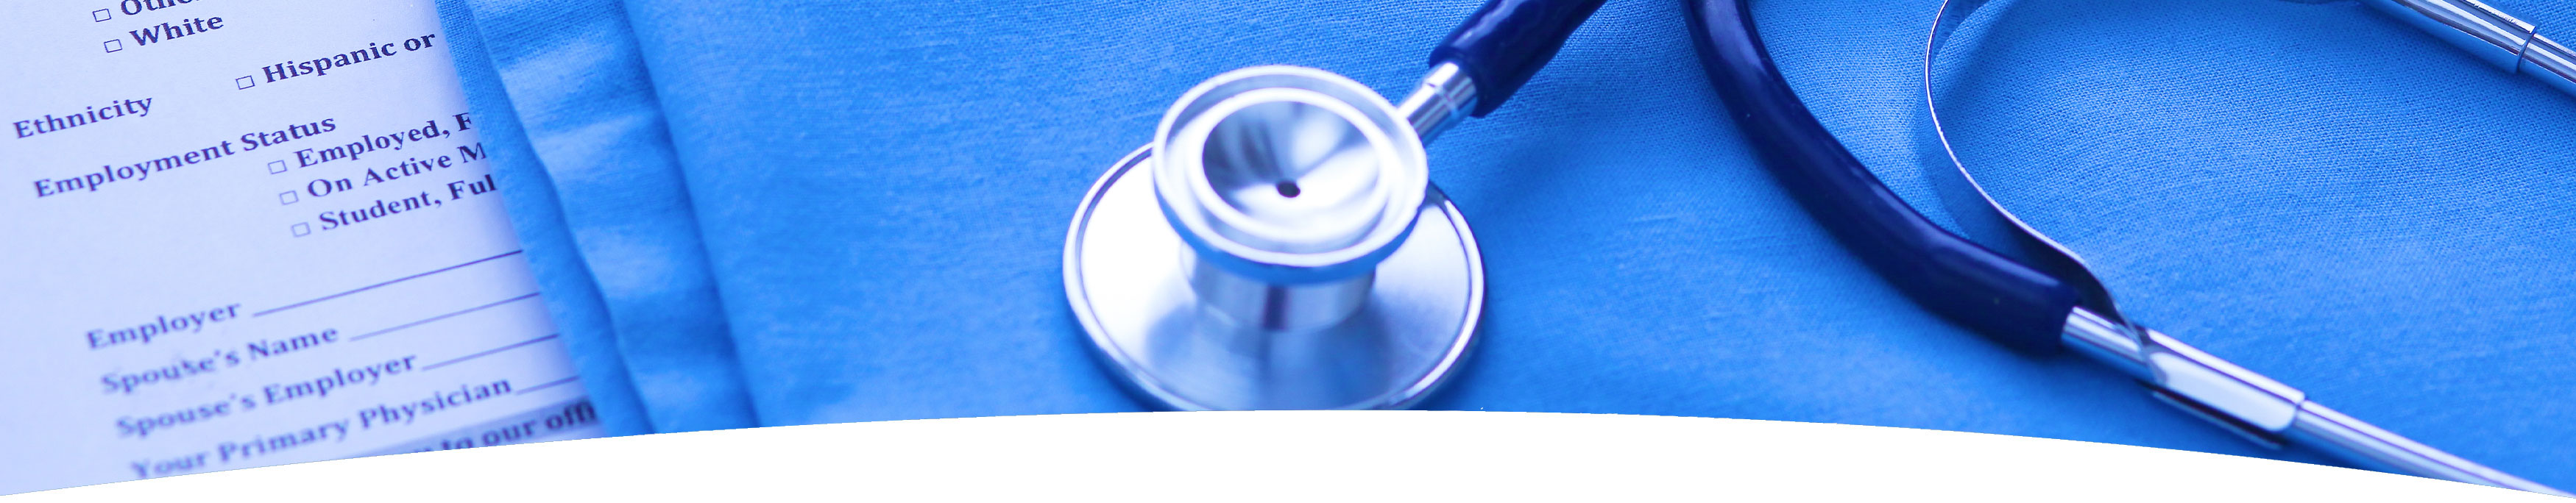 Banner picture of a stethoscope sitting on top of cloth and there is half of patient forms sticking out from underneath the cloth.